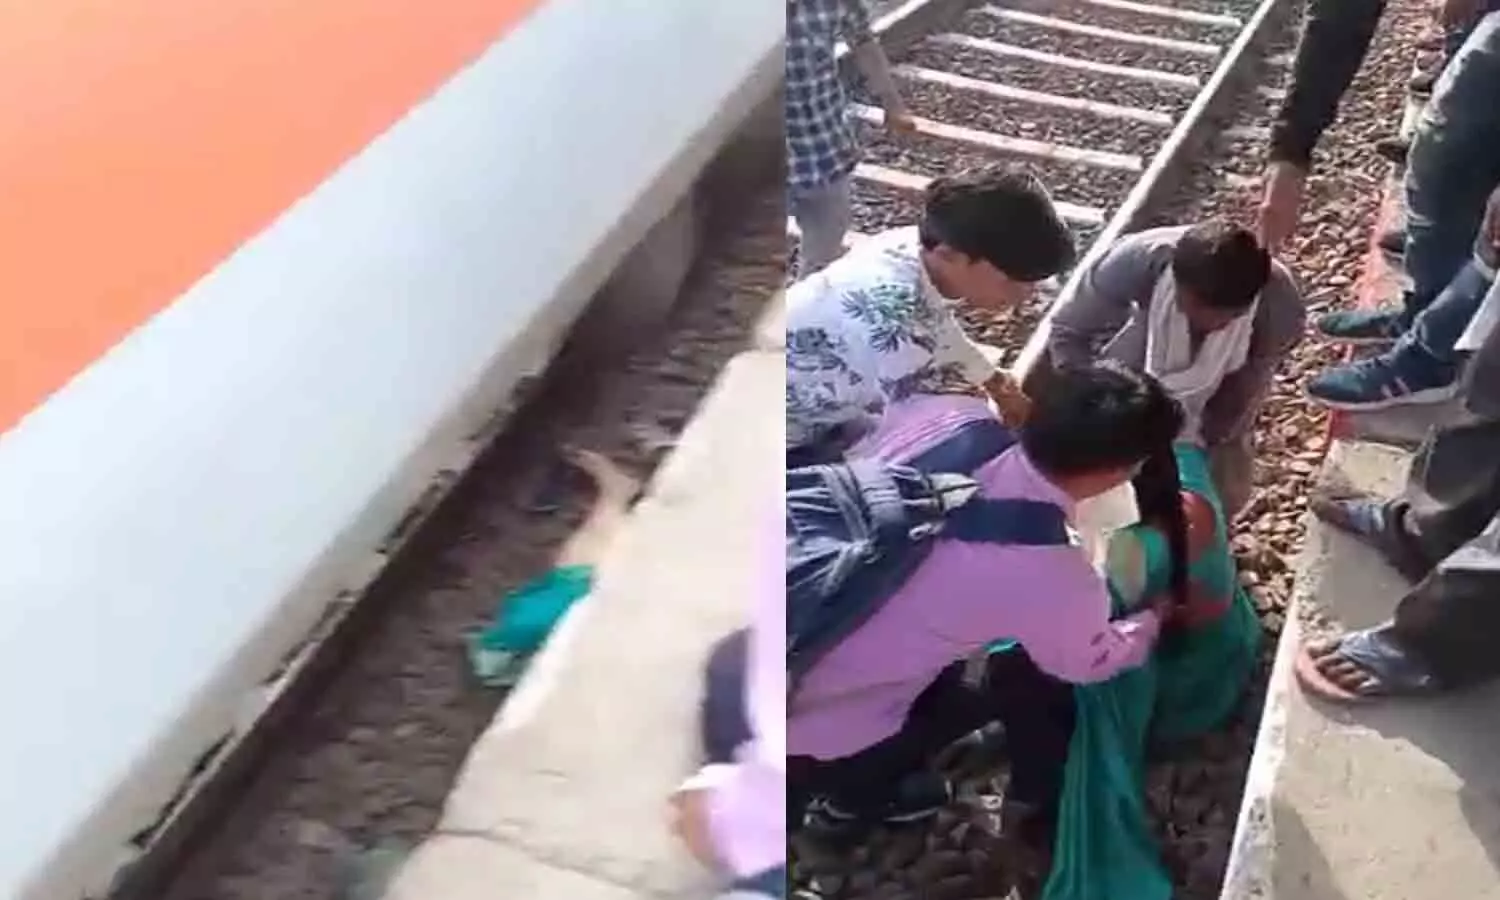 The whole train passed over the woman, yet escaped safely